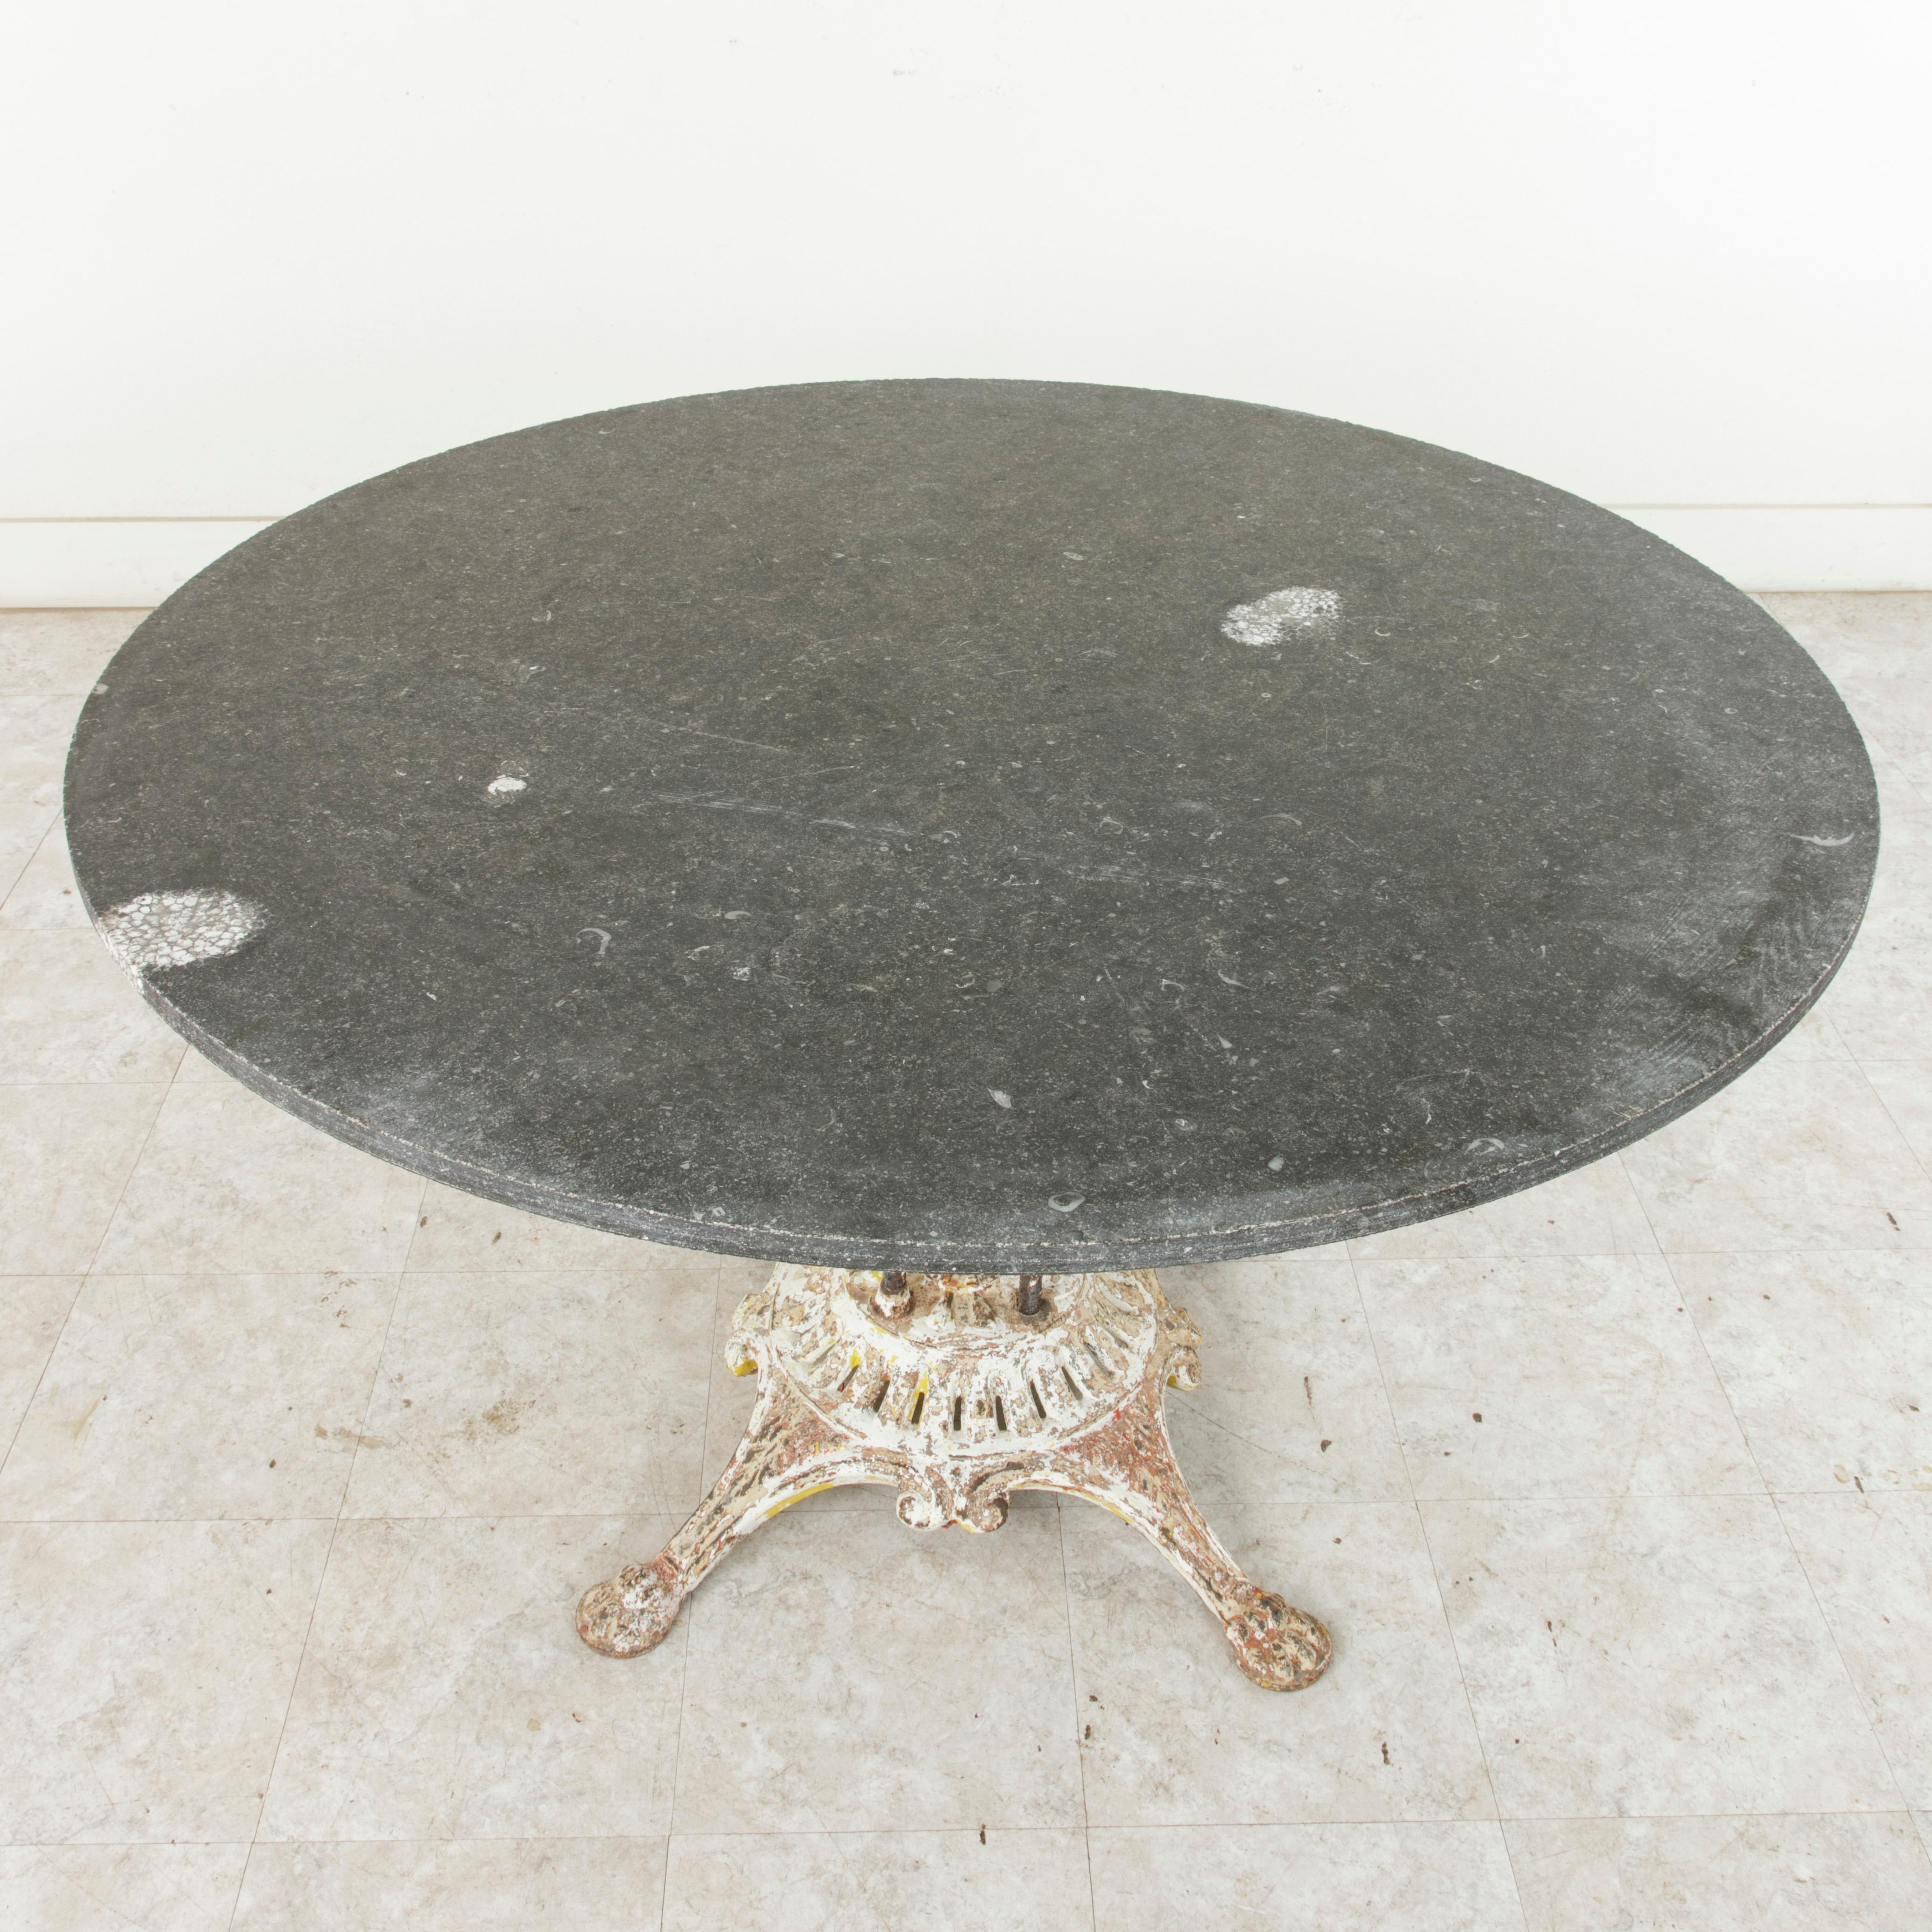 Early 20th Century Large French Iron Garden Table with 49 Inch Diameter Blue Stone Top, circa 1900